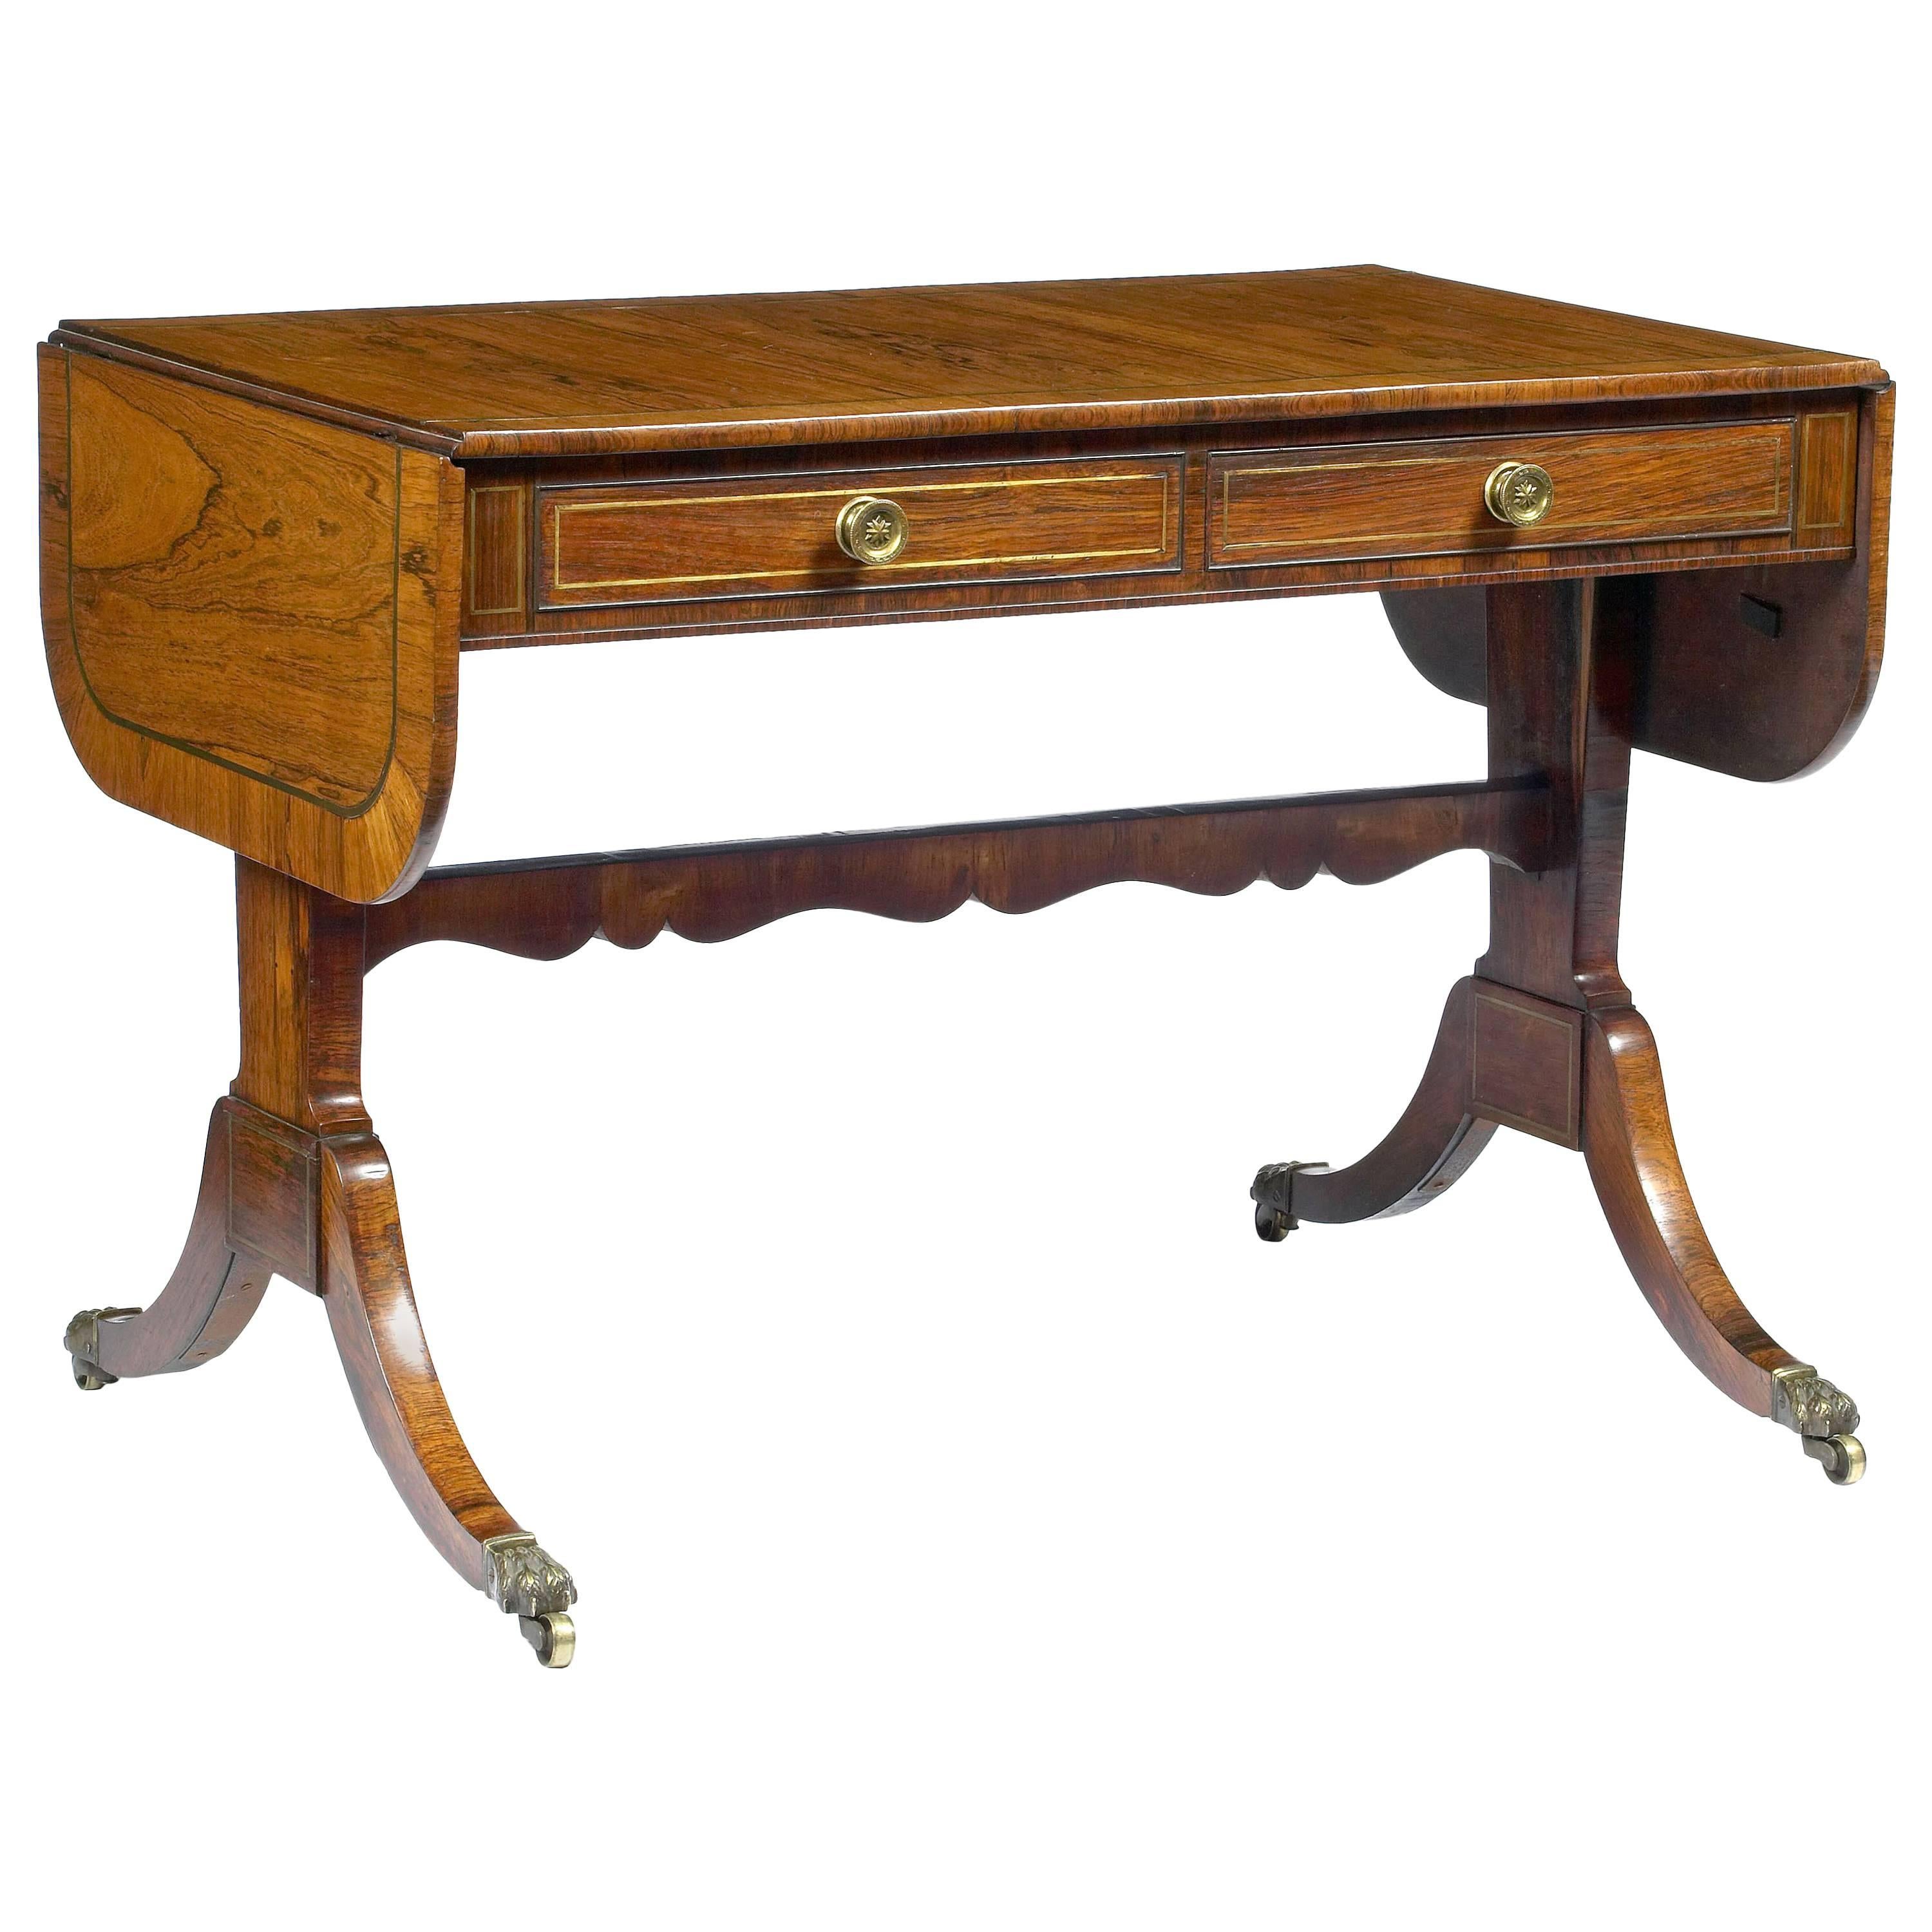 Early 19th Century Regency Sofa Table after Thomas Sheraton For Sale